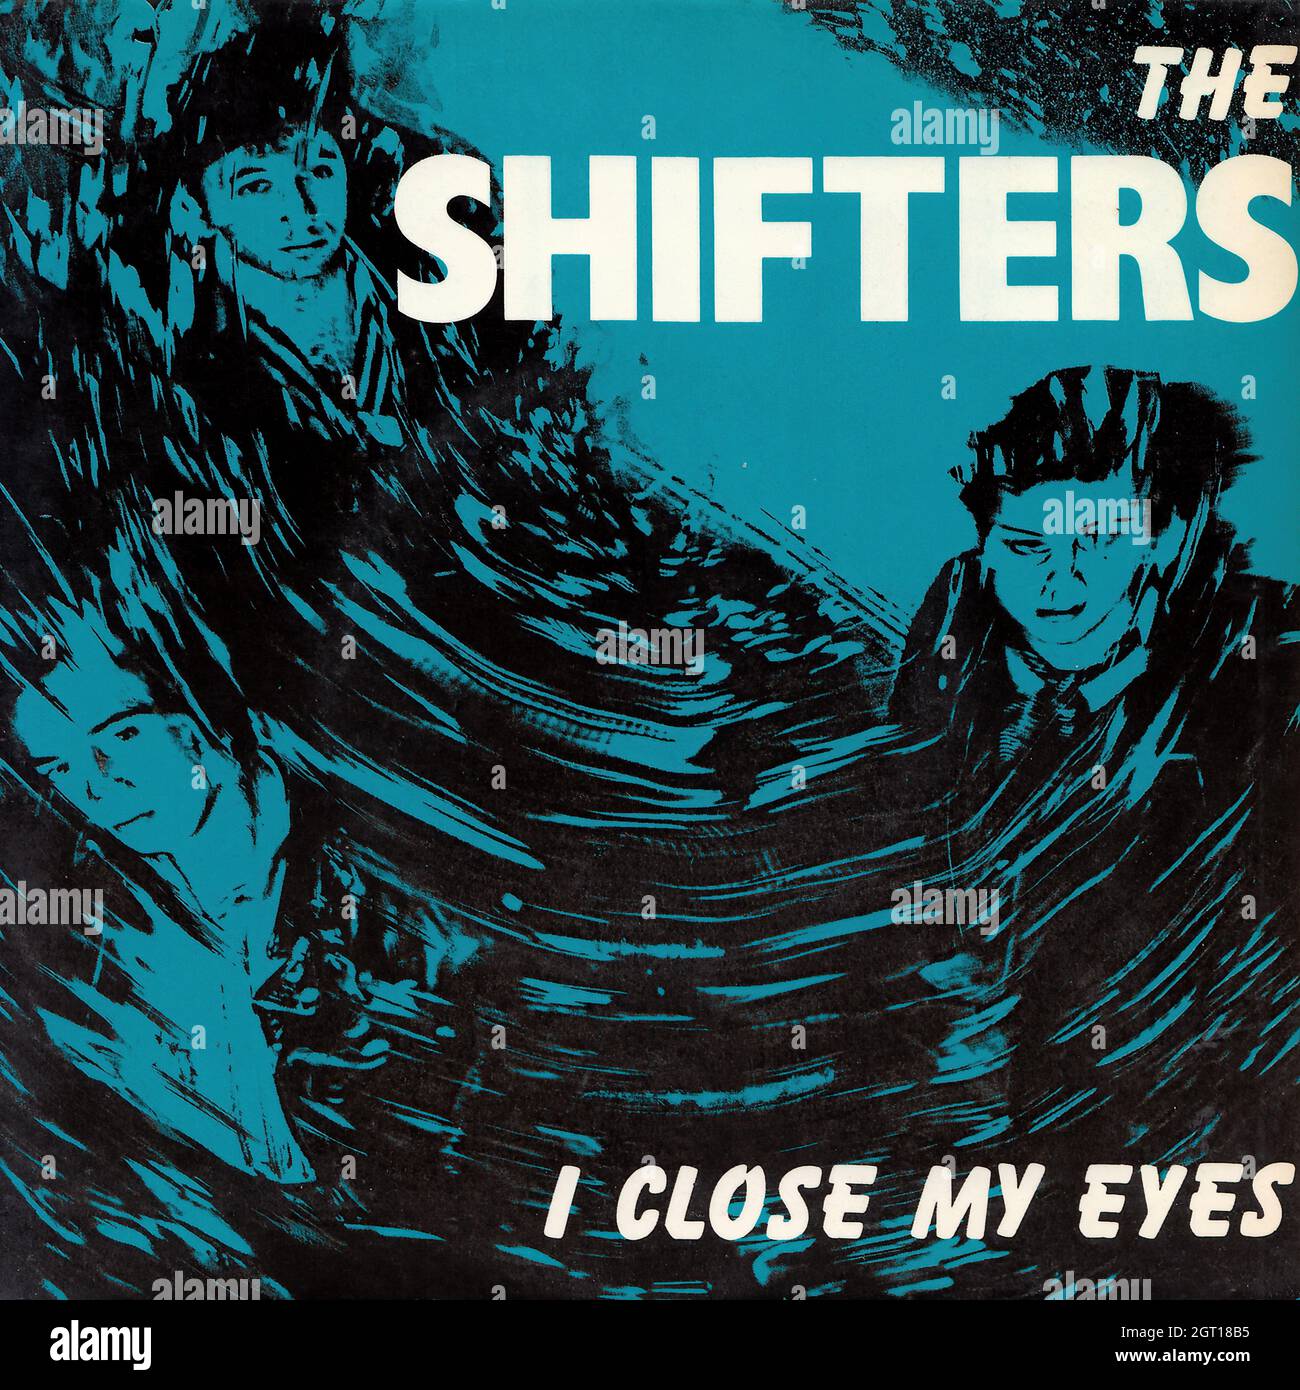 The Shifters - I close my eyes - It could be so easy 45rpm - Vintage Vinyl Record Cover Stock Photo